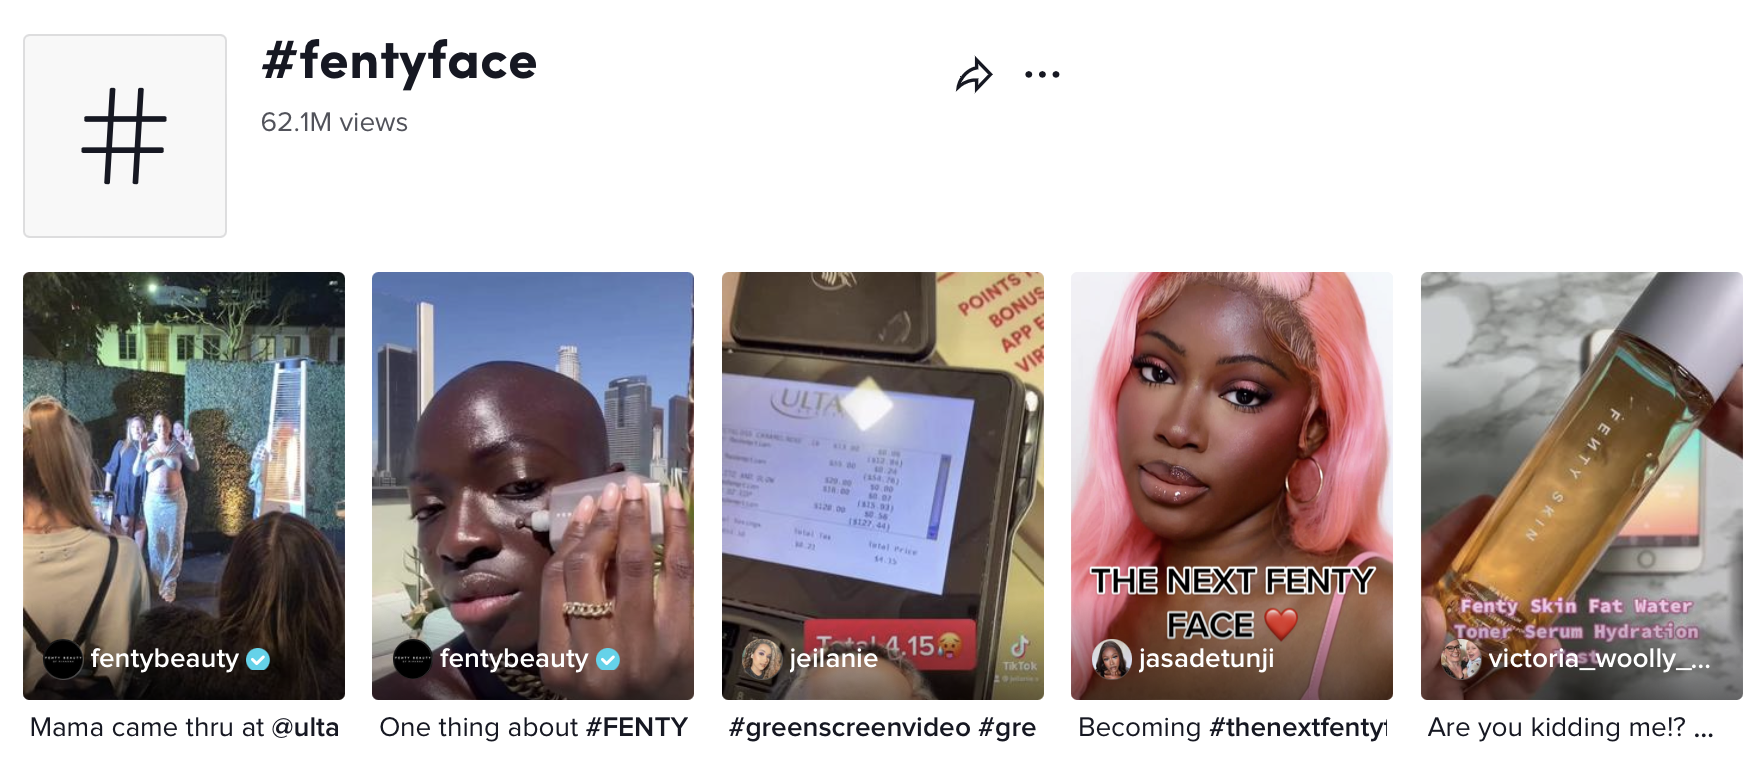 This is an example of how Fenti makes use of TikTok hashtags to boost its visibility on the platform.